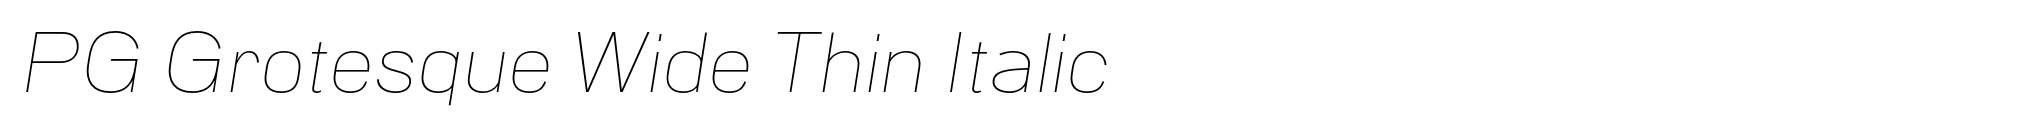 PG Grotesque Wide Thin Italic image